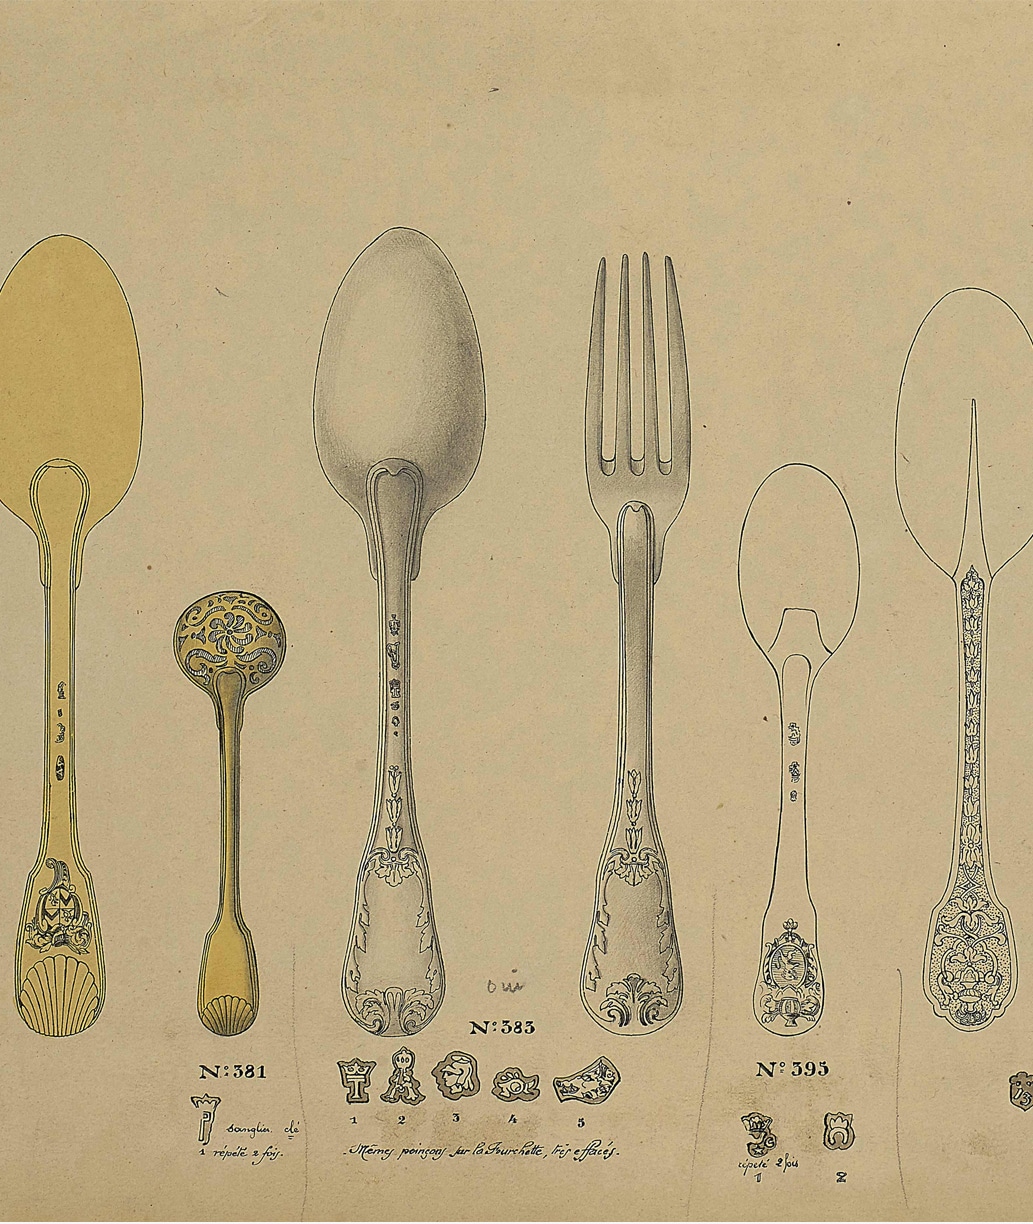 Drawings of pieces of cutlery of different sizes and forms, time period not defined